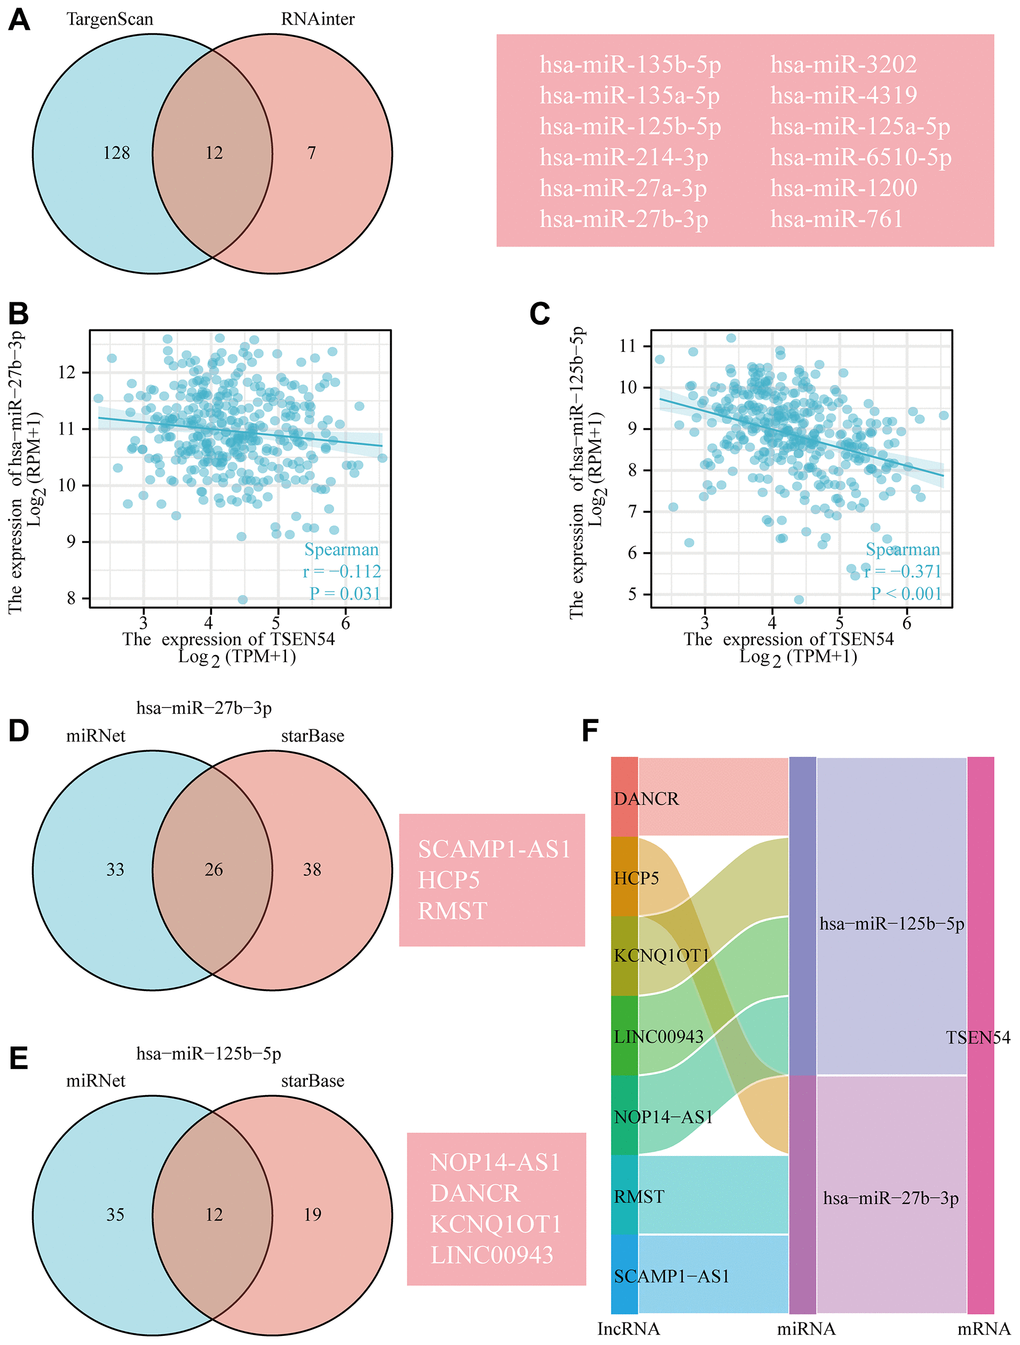 The predicted ceRNA network of TSEN54 in HCC. (A) The Venn diagram demonstrates the miRNAs targeting TSEN54 predicted by TargetScan and RNAinter databases. The correlation scatter plots reveal the expression relevance of TSEN54 with (B) hsa-miR-27b-3p and (C) hsa-miR-125b-5p. Venn diagram illustrates the prediction of lncRNAs targeting (D) hsa-miR-27b-3p and (E) hsa-miR-125b-5p through miRNet and starBase tools. (F) Sankey diagram presents the ceRNA network of TSEN54 in HCC.